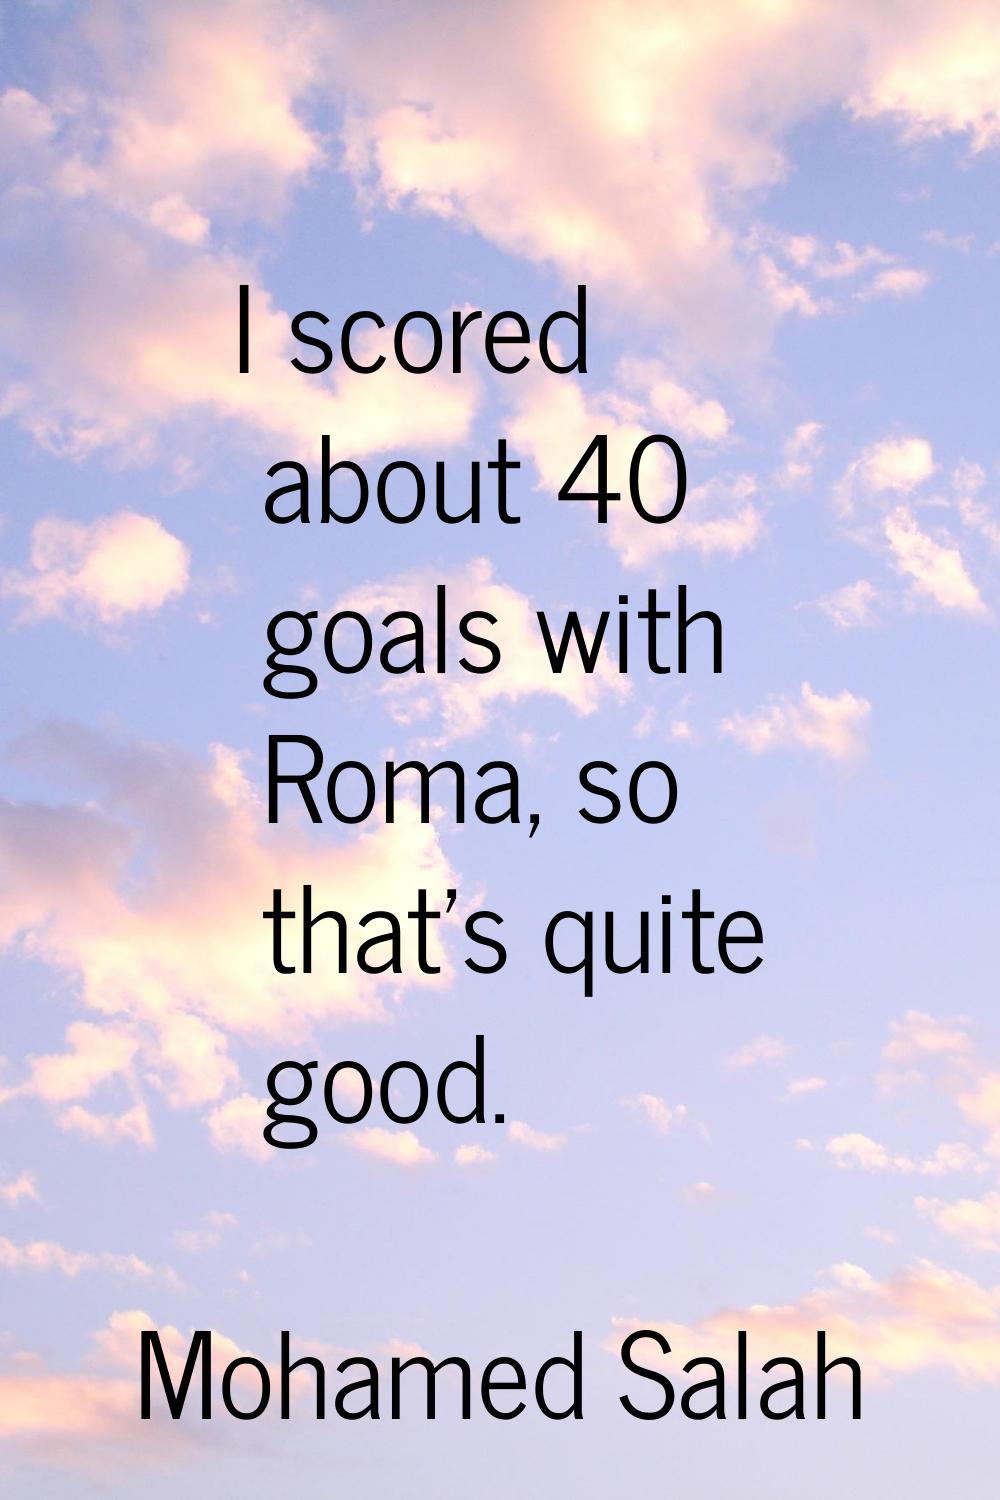 I scored about 40 goals with Roma, so that's quite good.